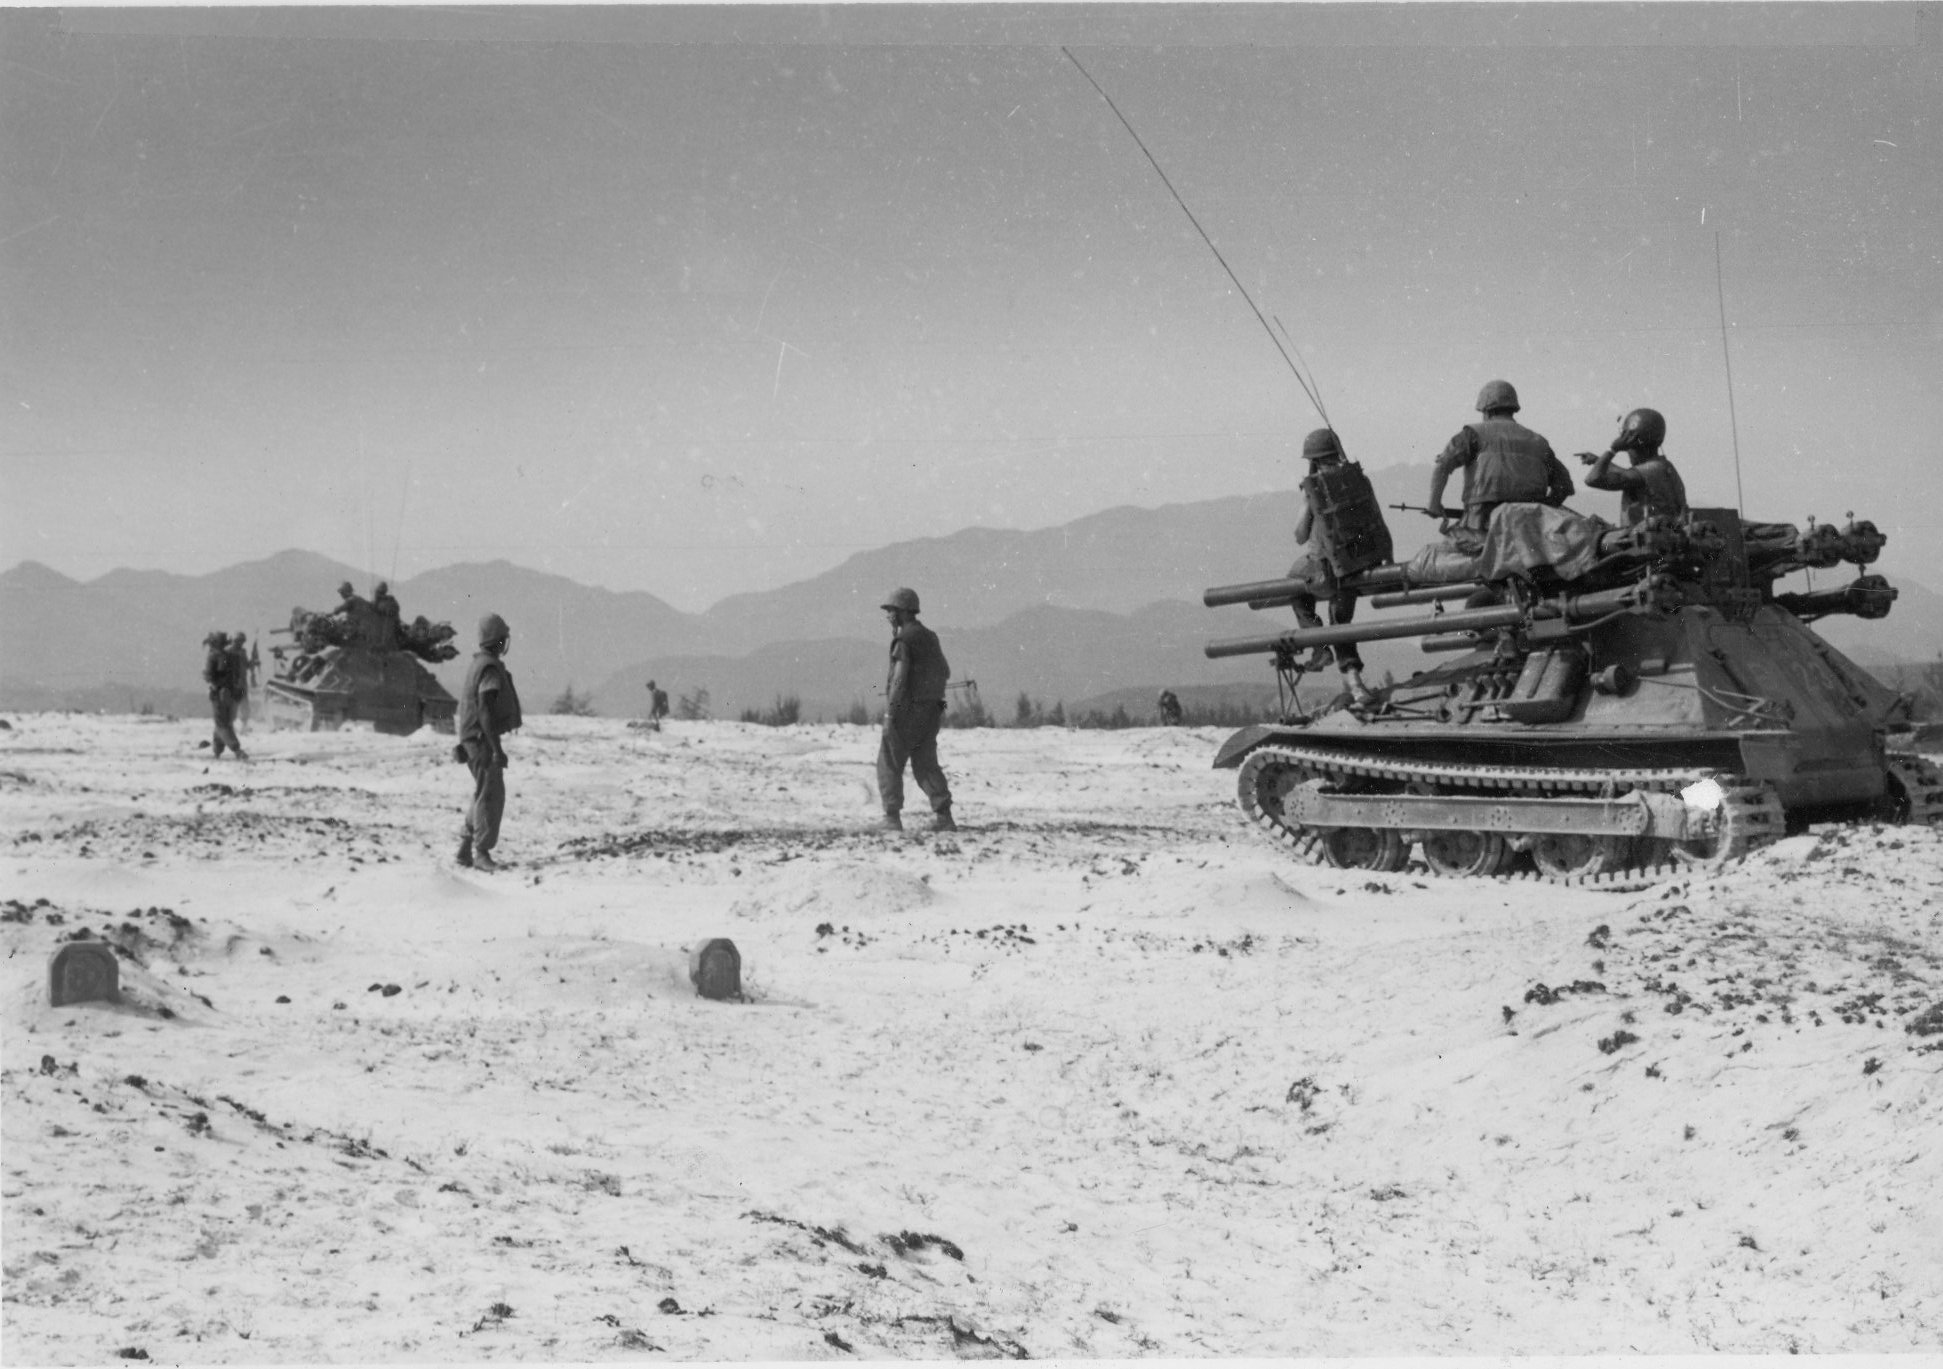 some men stand near military vehicles in the sand